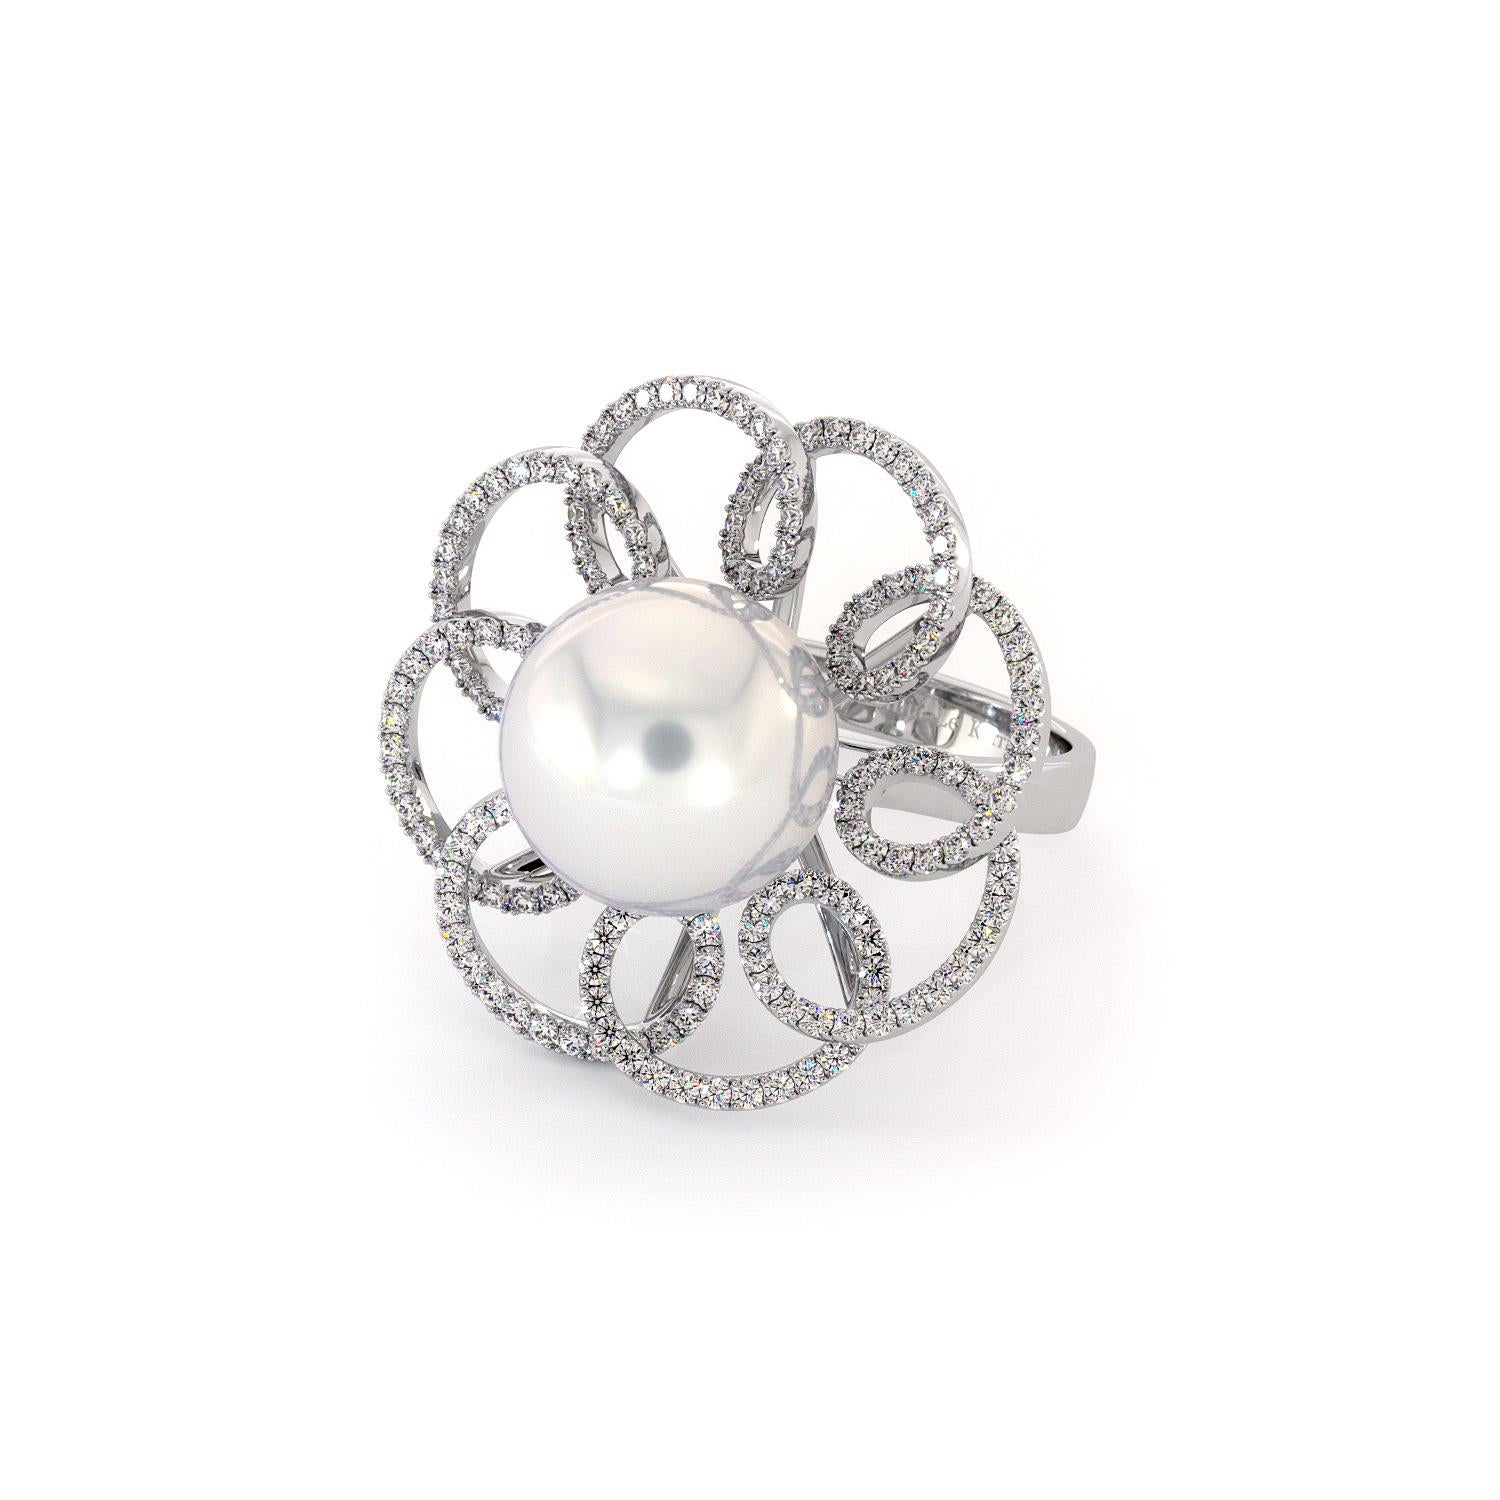 For Sale:  18K White Gold White South Sea Pearl Diamonds Ring by Emilia Lekarrier Certified 3